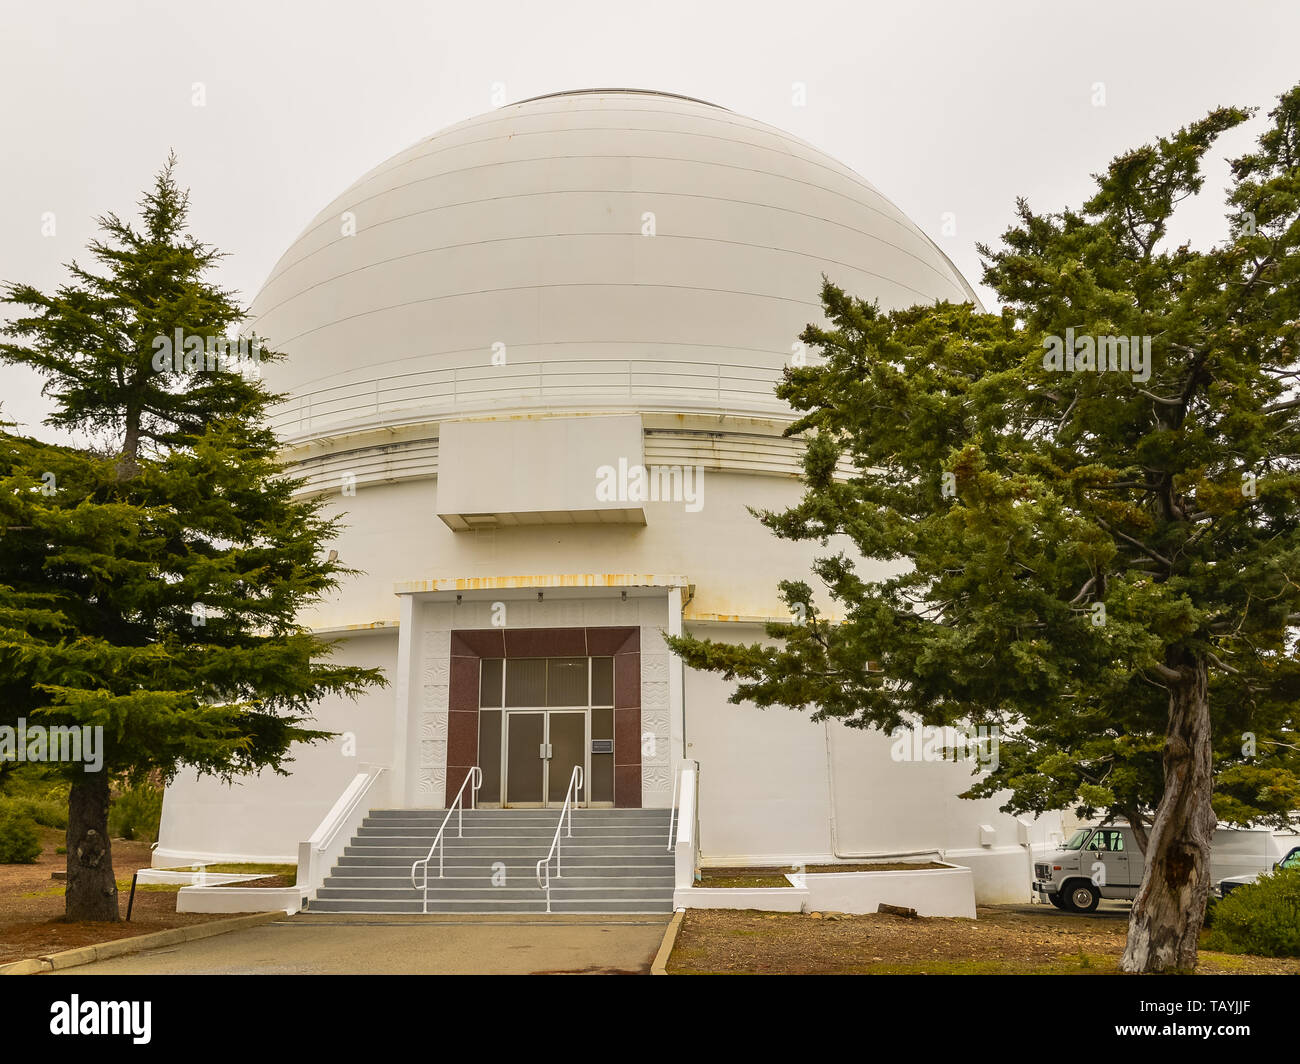 Dome that houses the 120-inch Shane telescope at Lick Observatory - Mount Hamilton, San Jose, CA Stock Photo